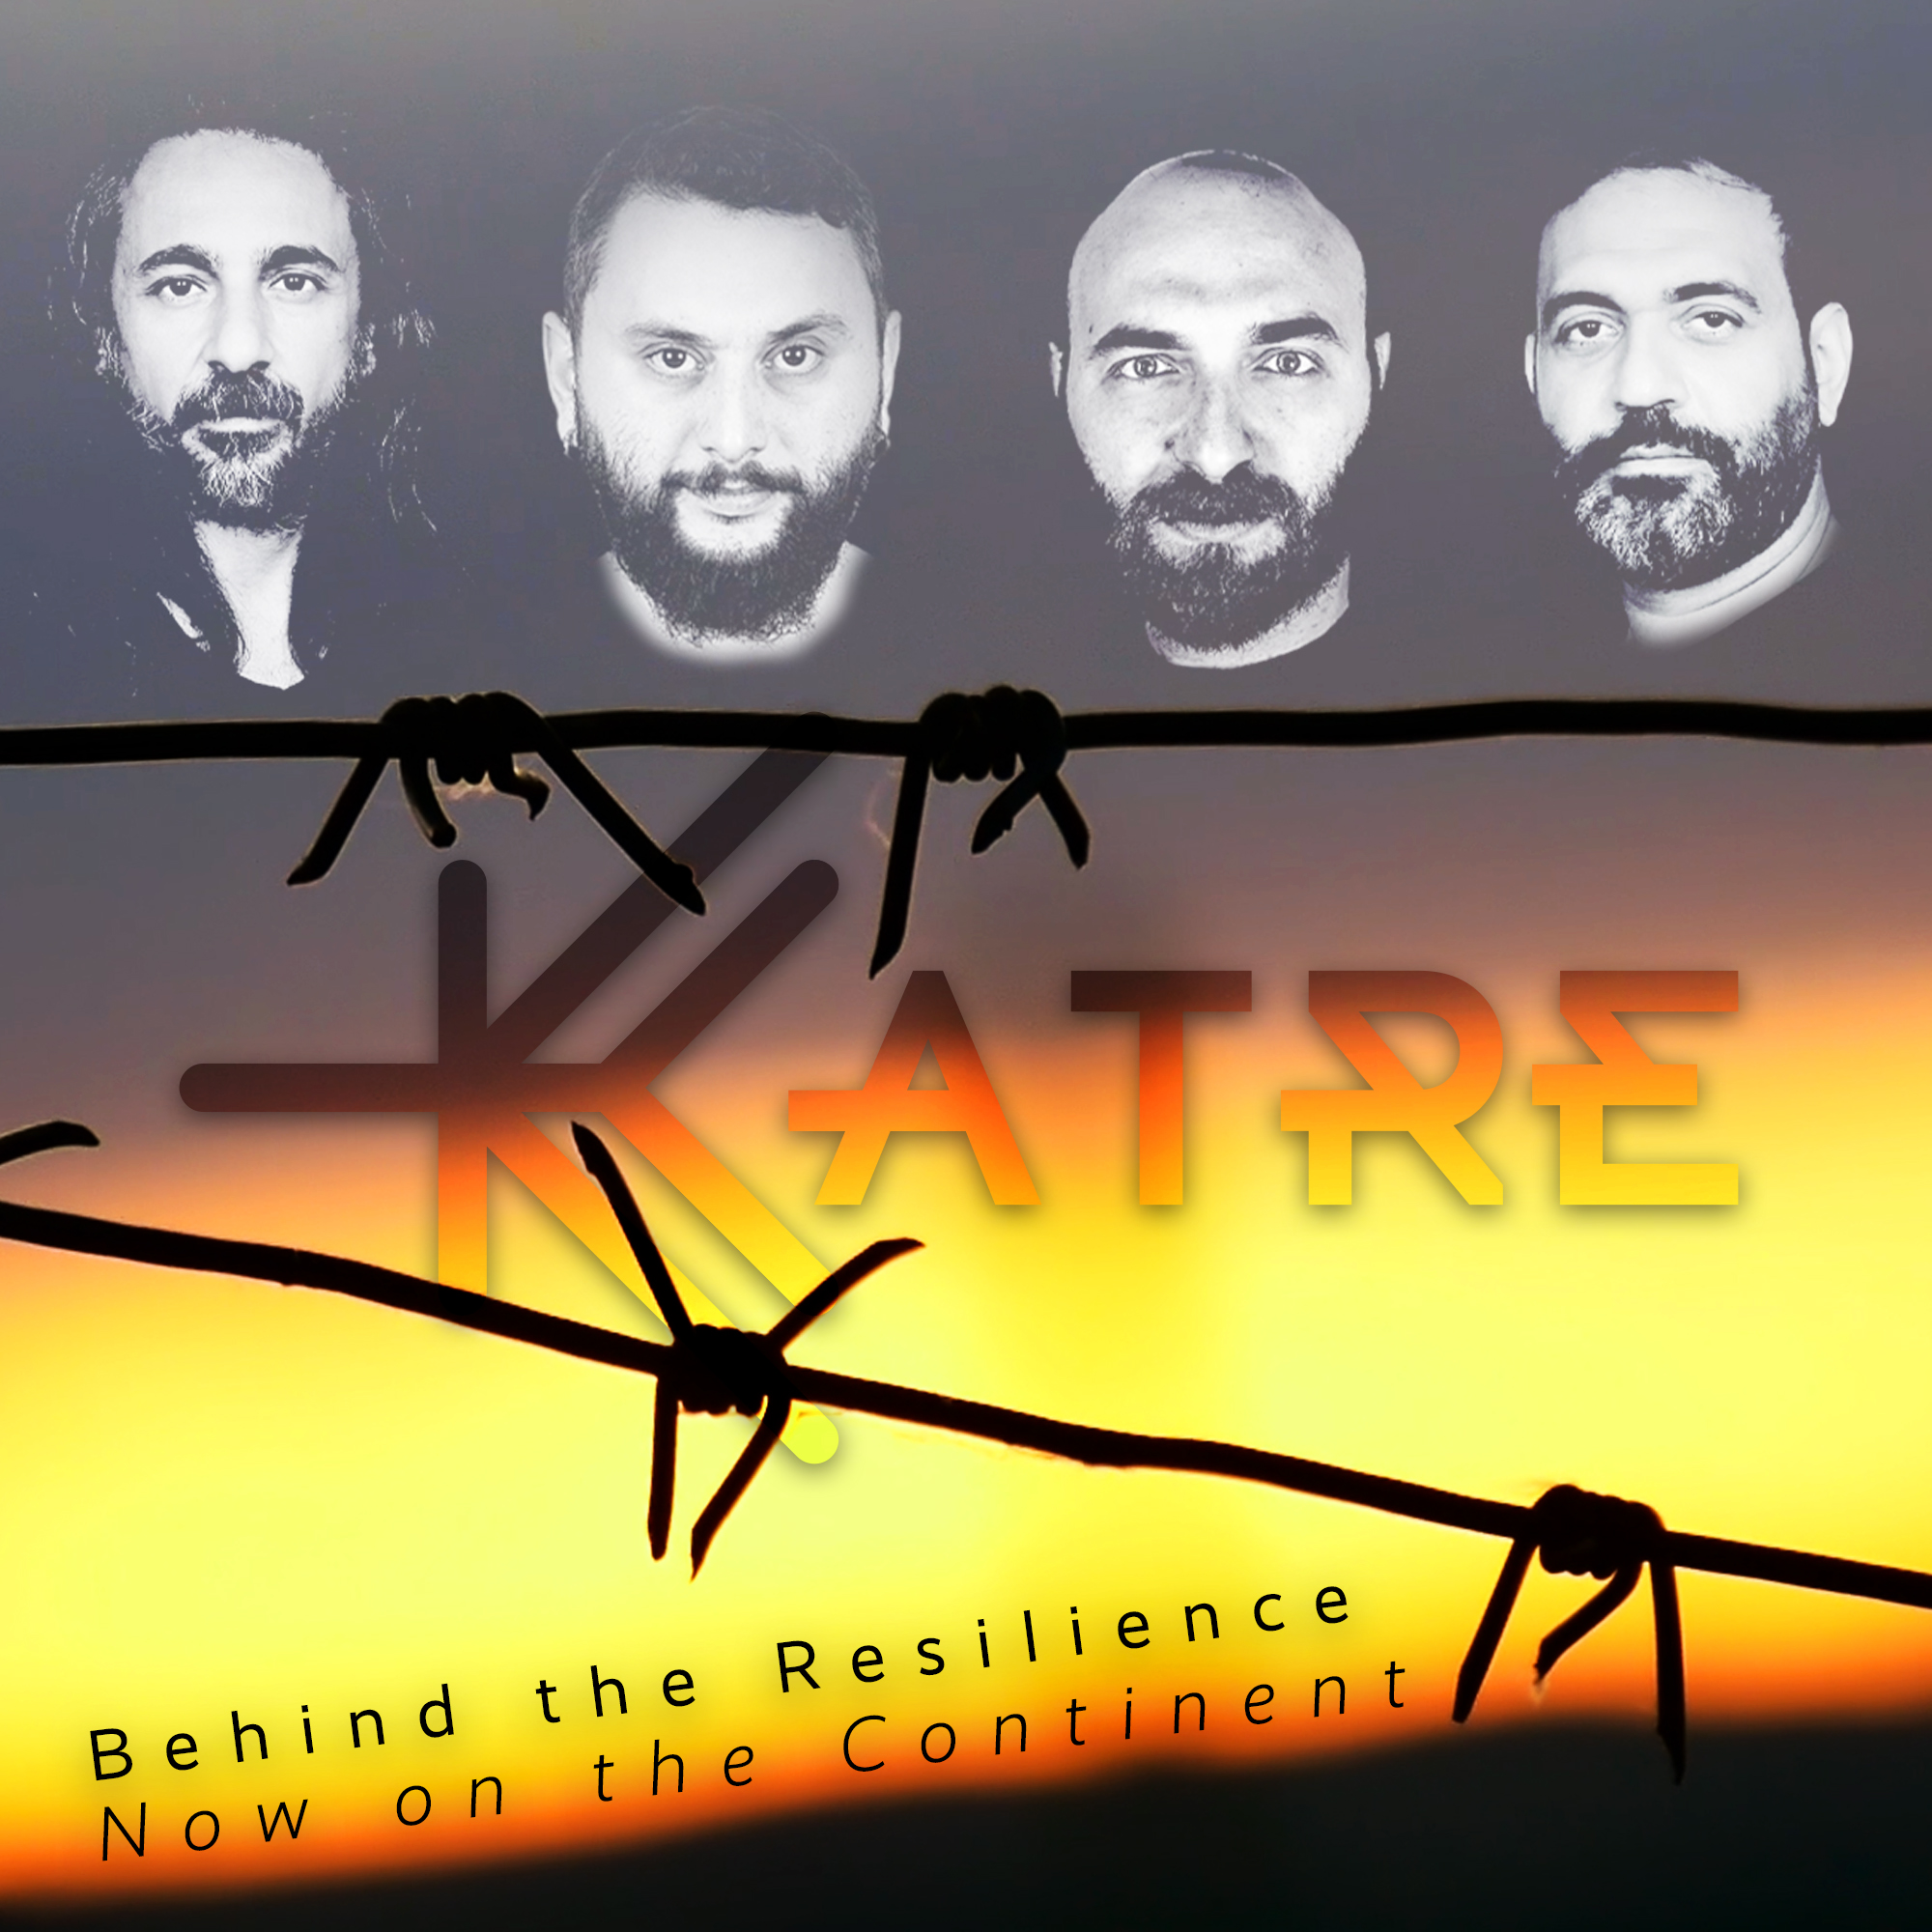 KATRE – “Now on the Continent” από το album “Behind the Resilience”